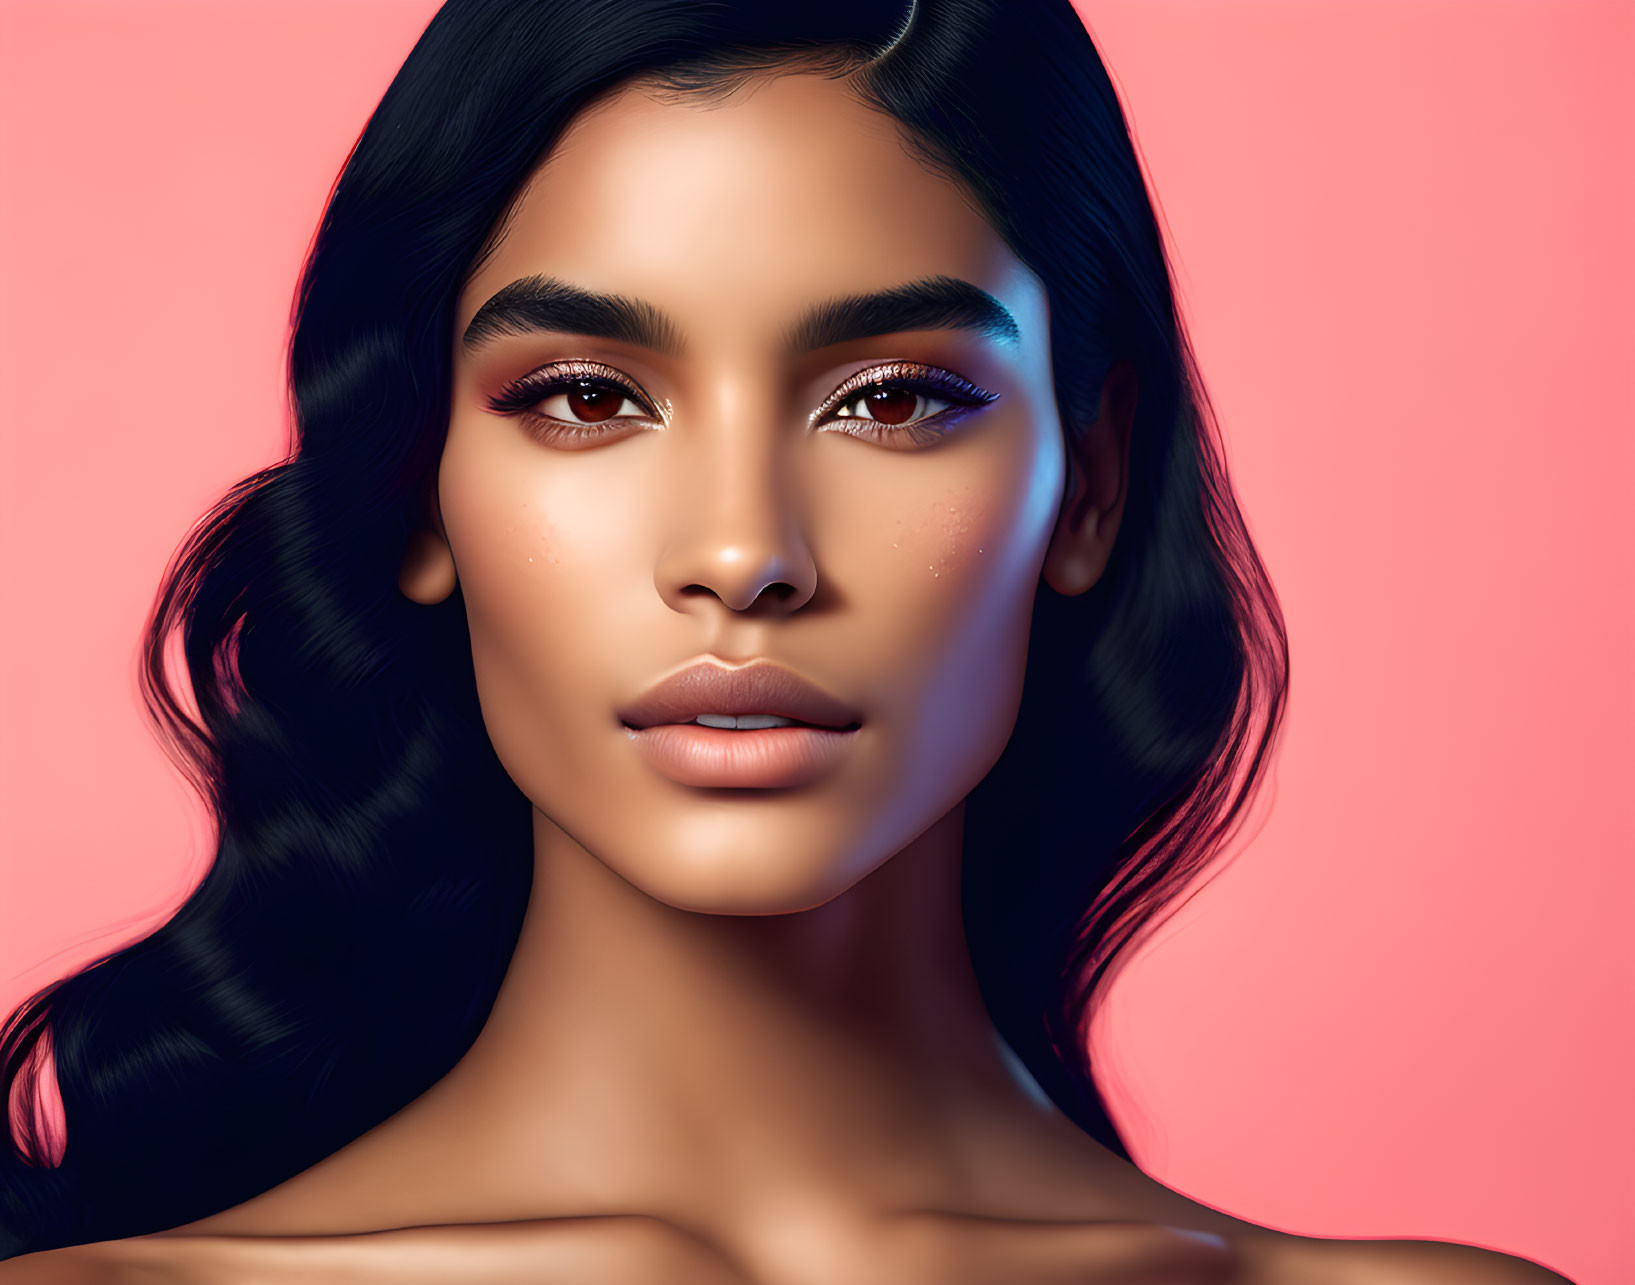 Detailed digital art portrait of a woman with flawless skin and bold makeup on a pink background